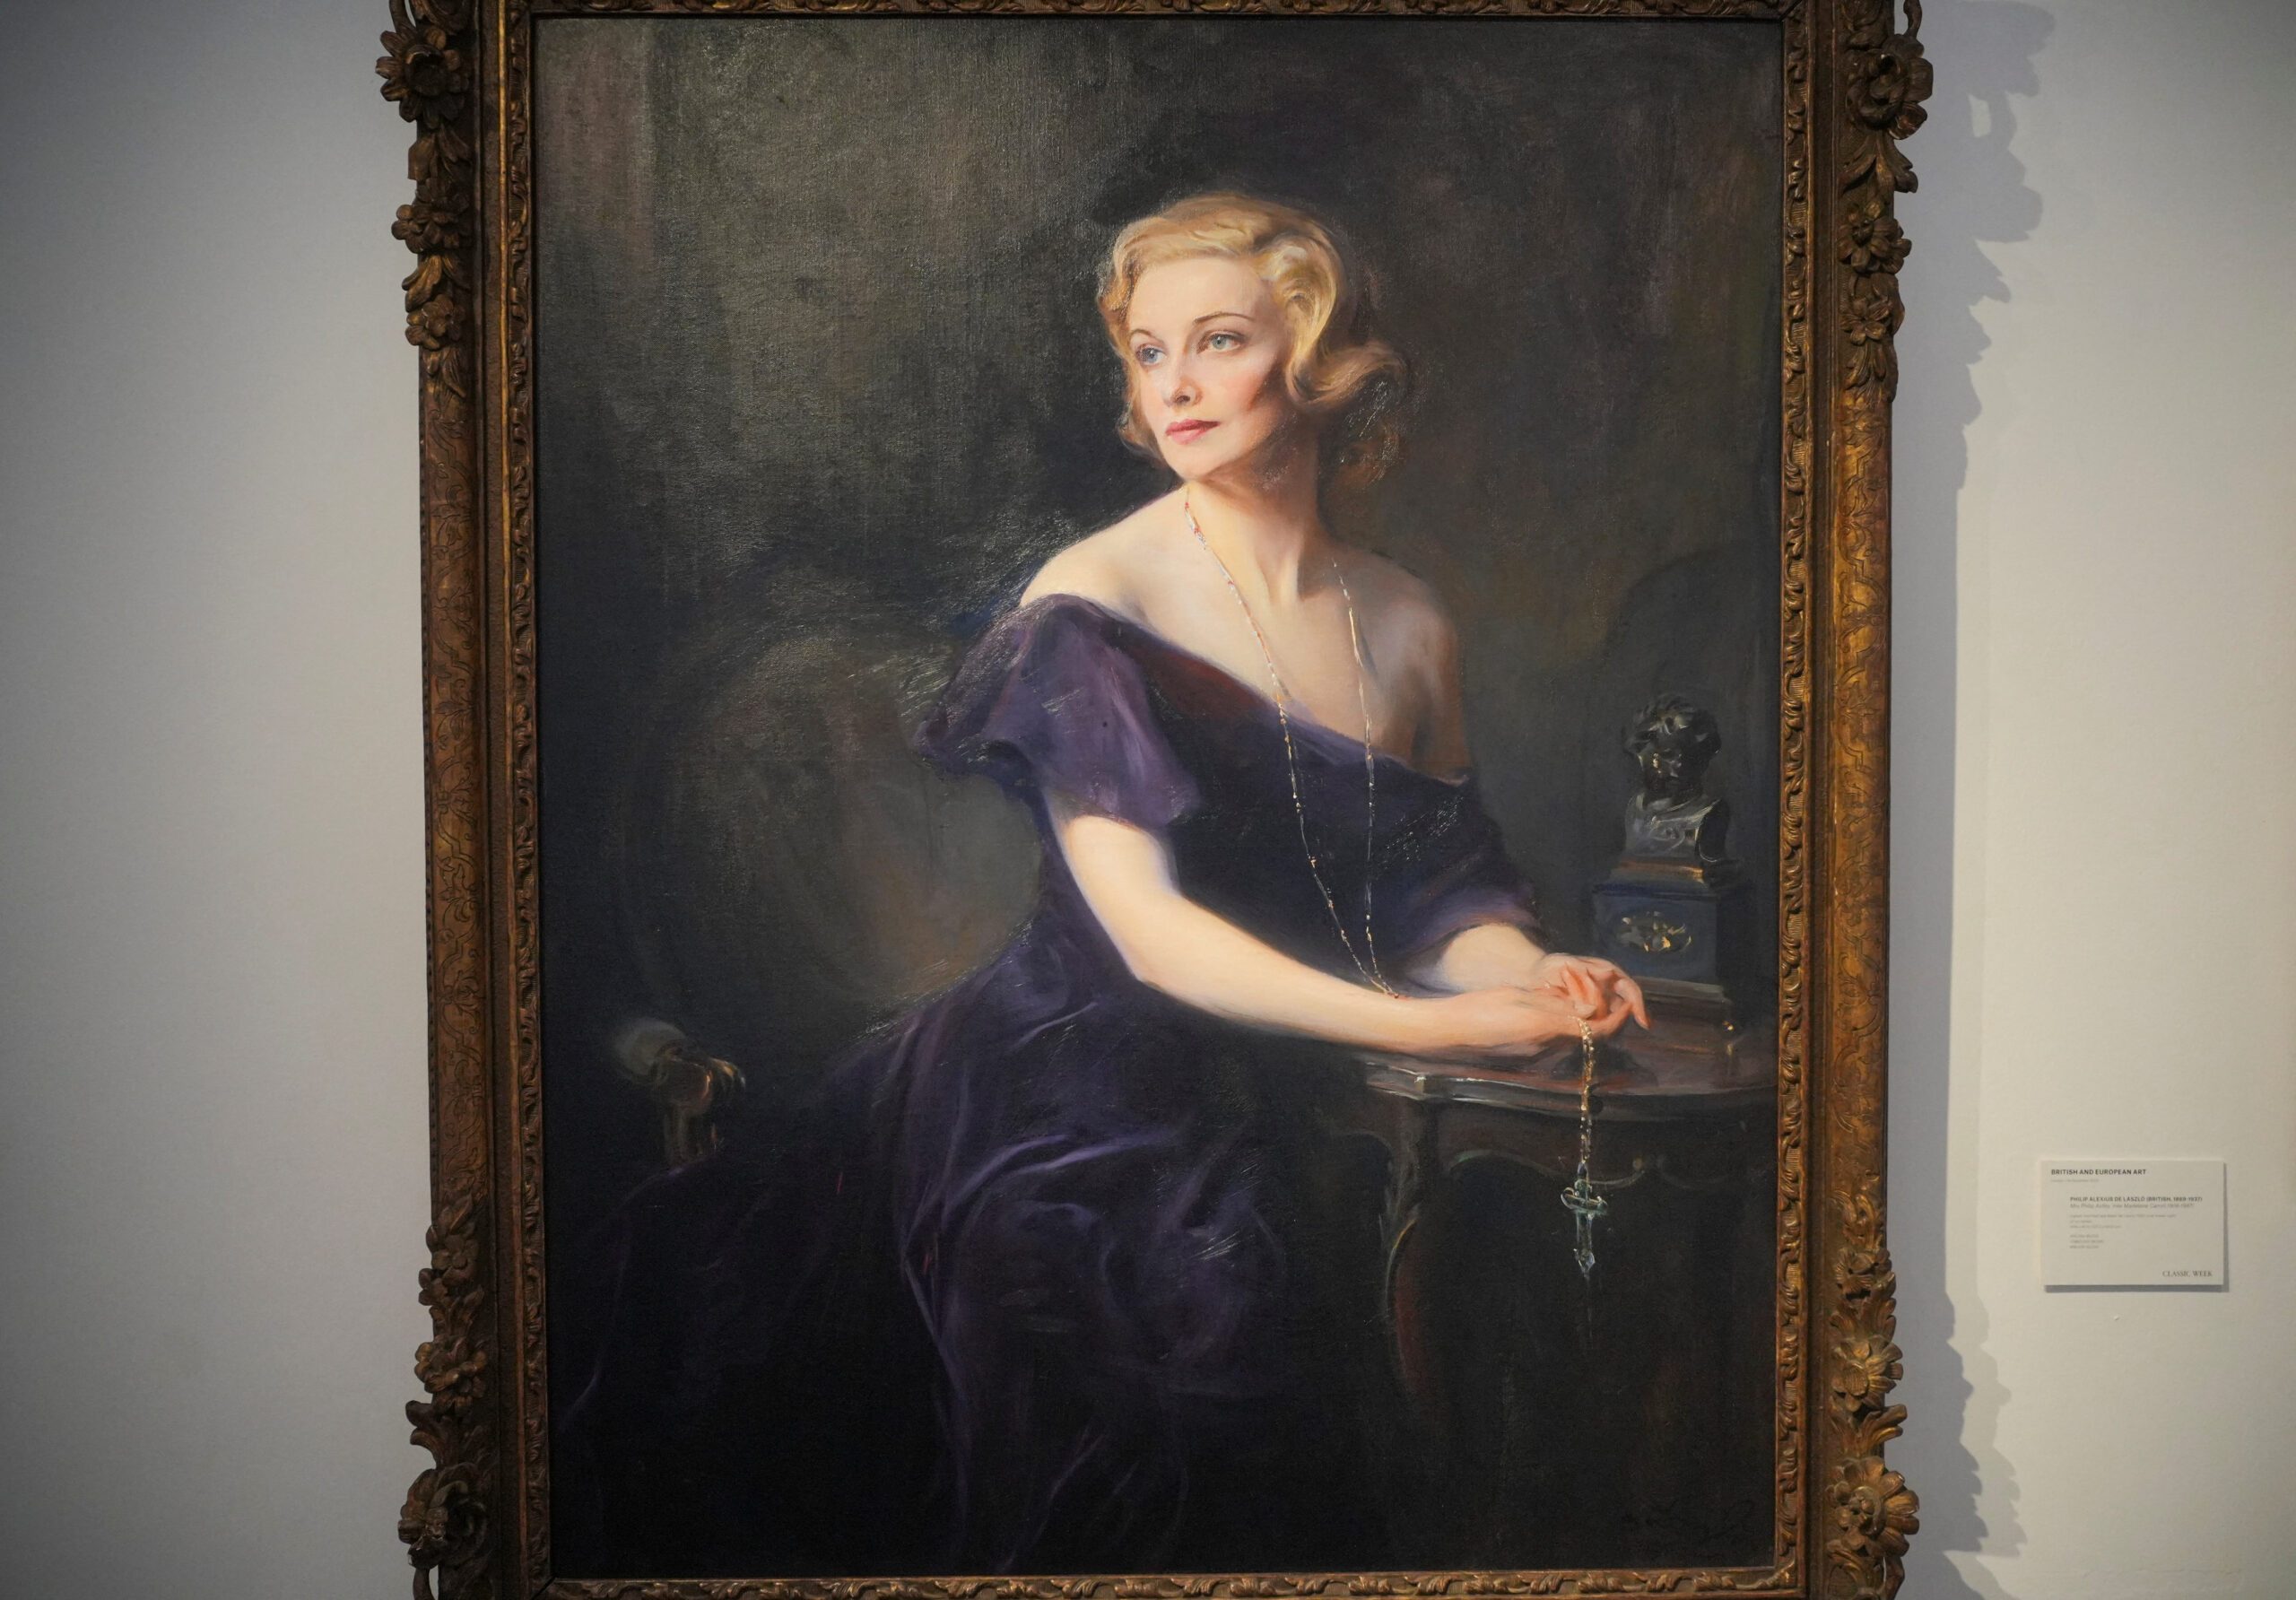 Madeleine Carroll portrait, 1st ‘Hitchcock Blonde,’ headed to auction